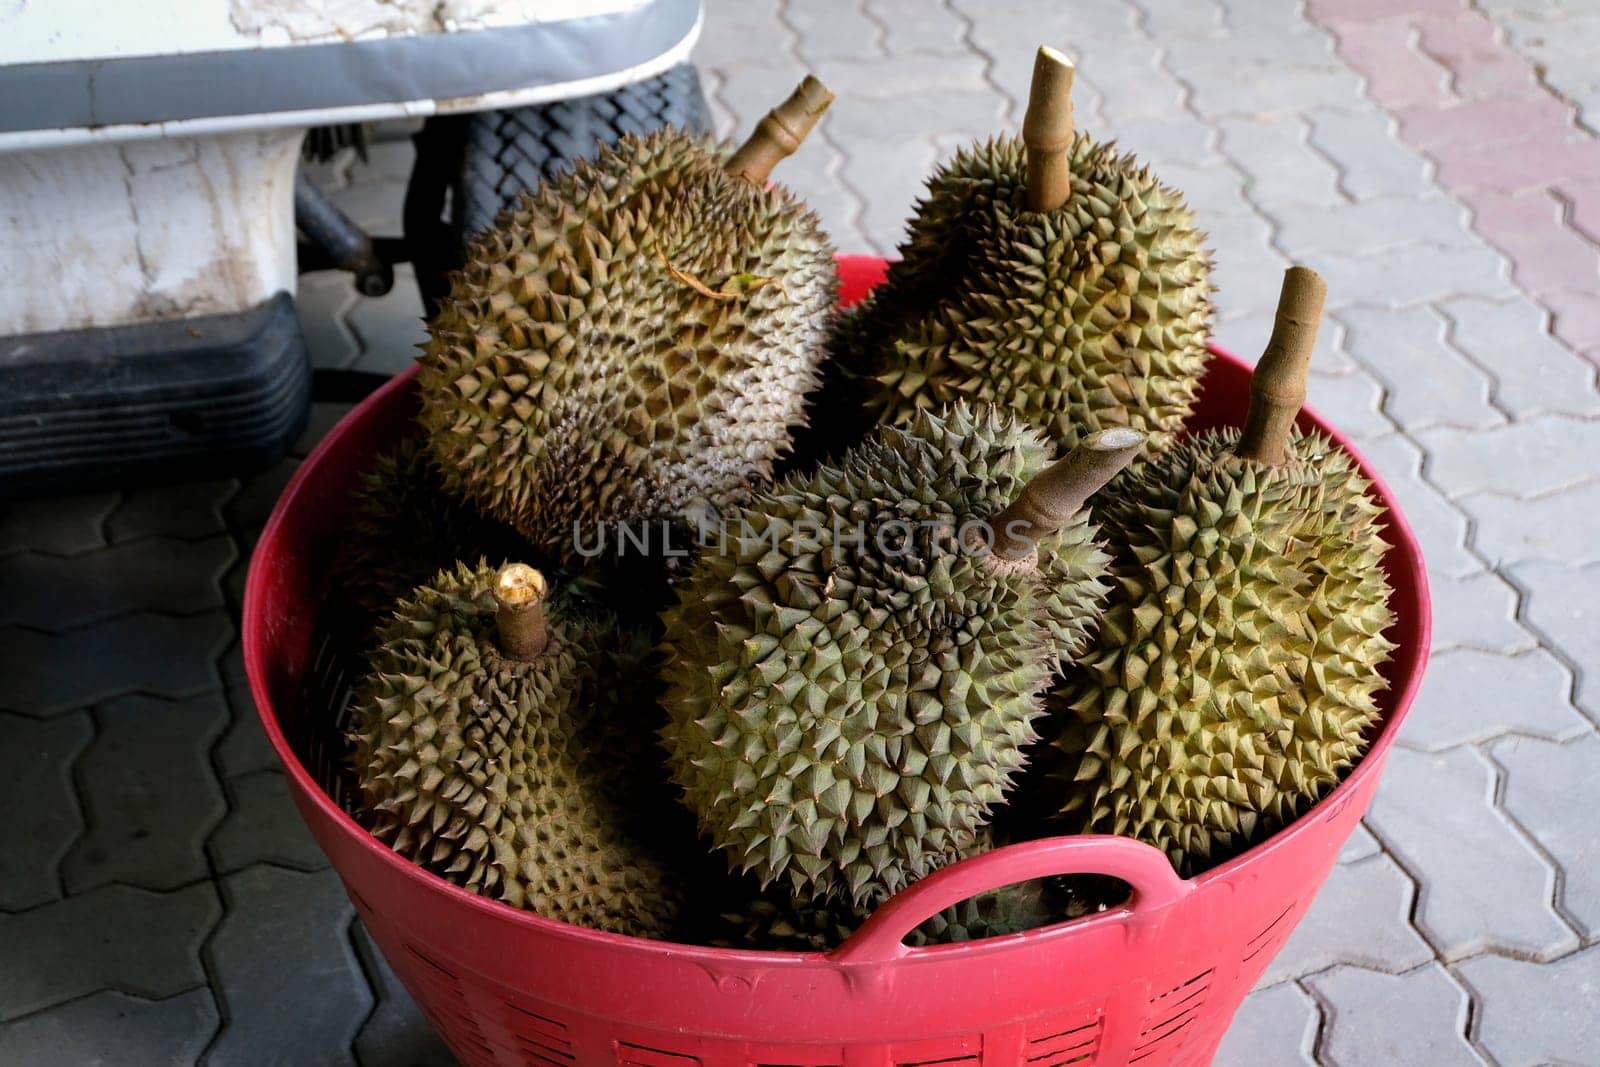 Mon Thong durian fruit in the red basket. Regarded by many people in southeast asia as the king of fruits.